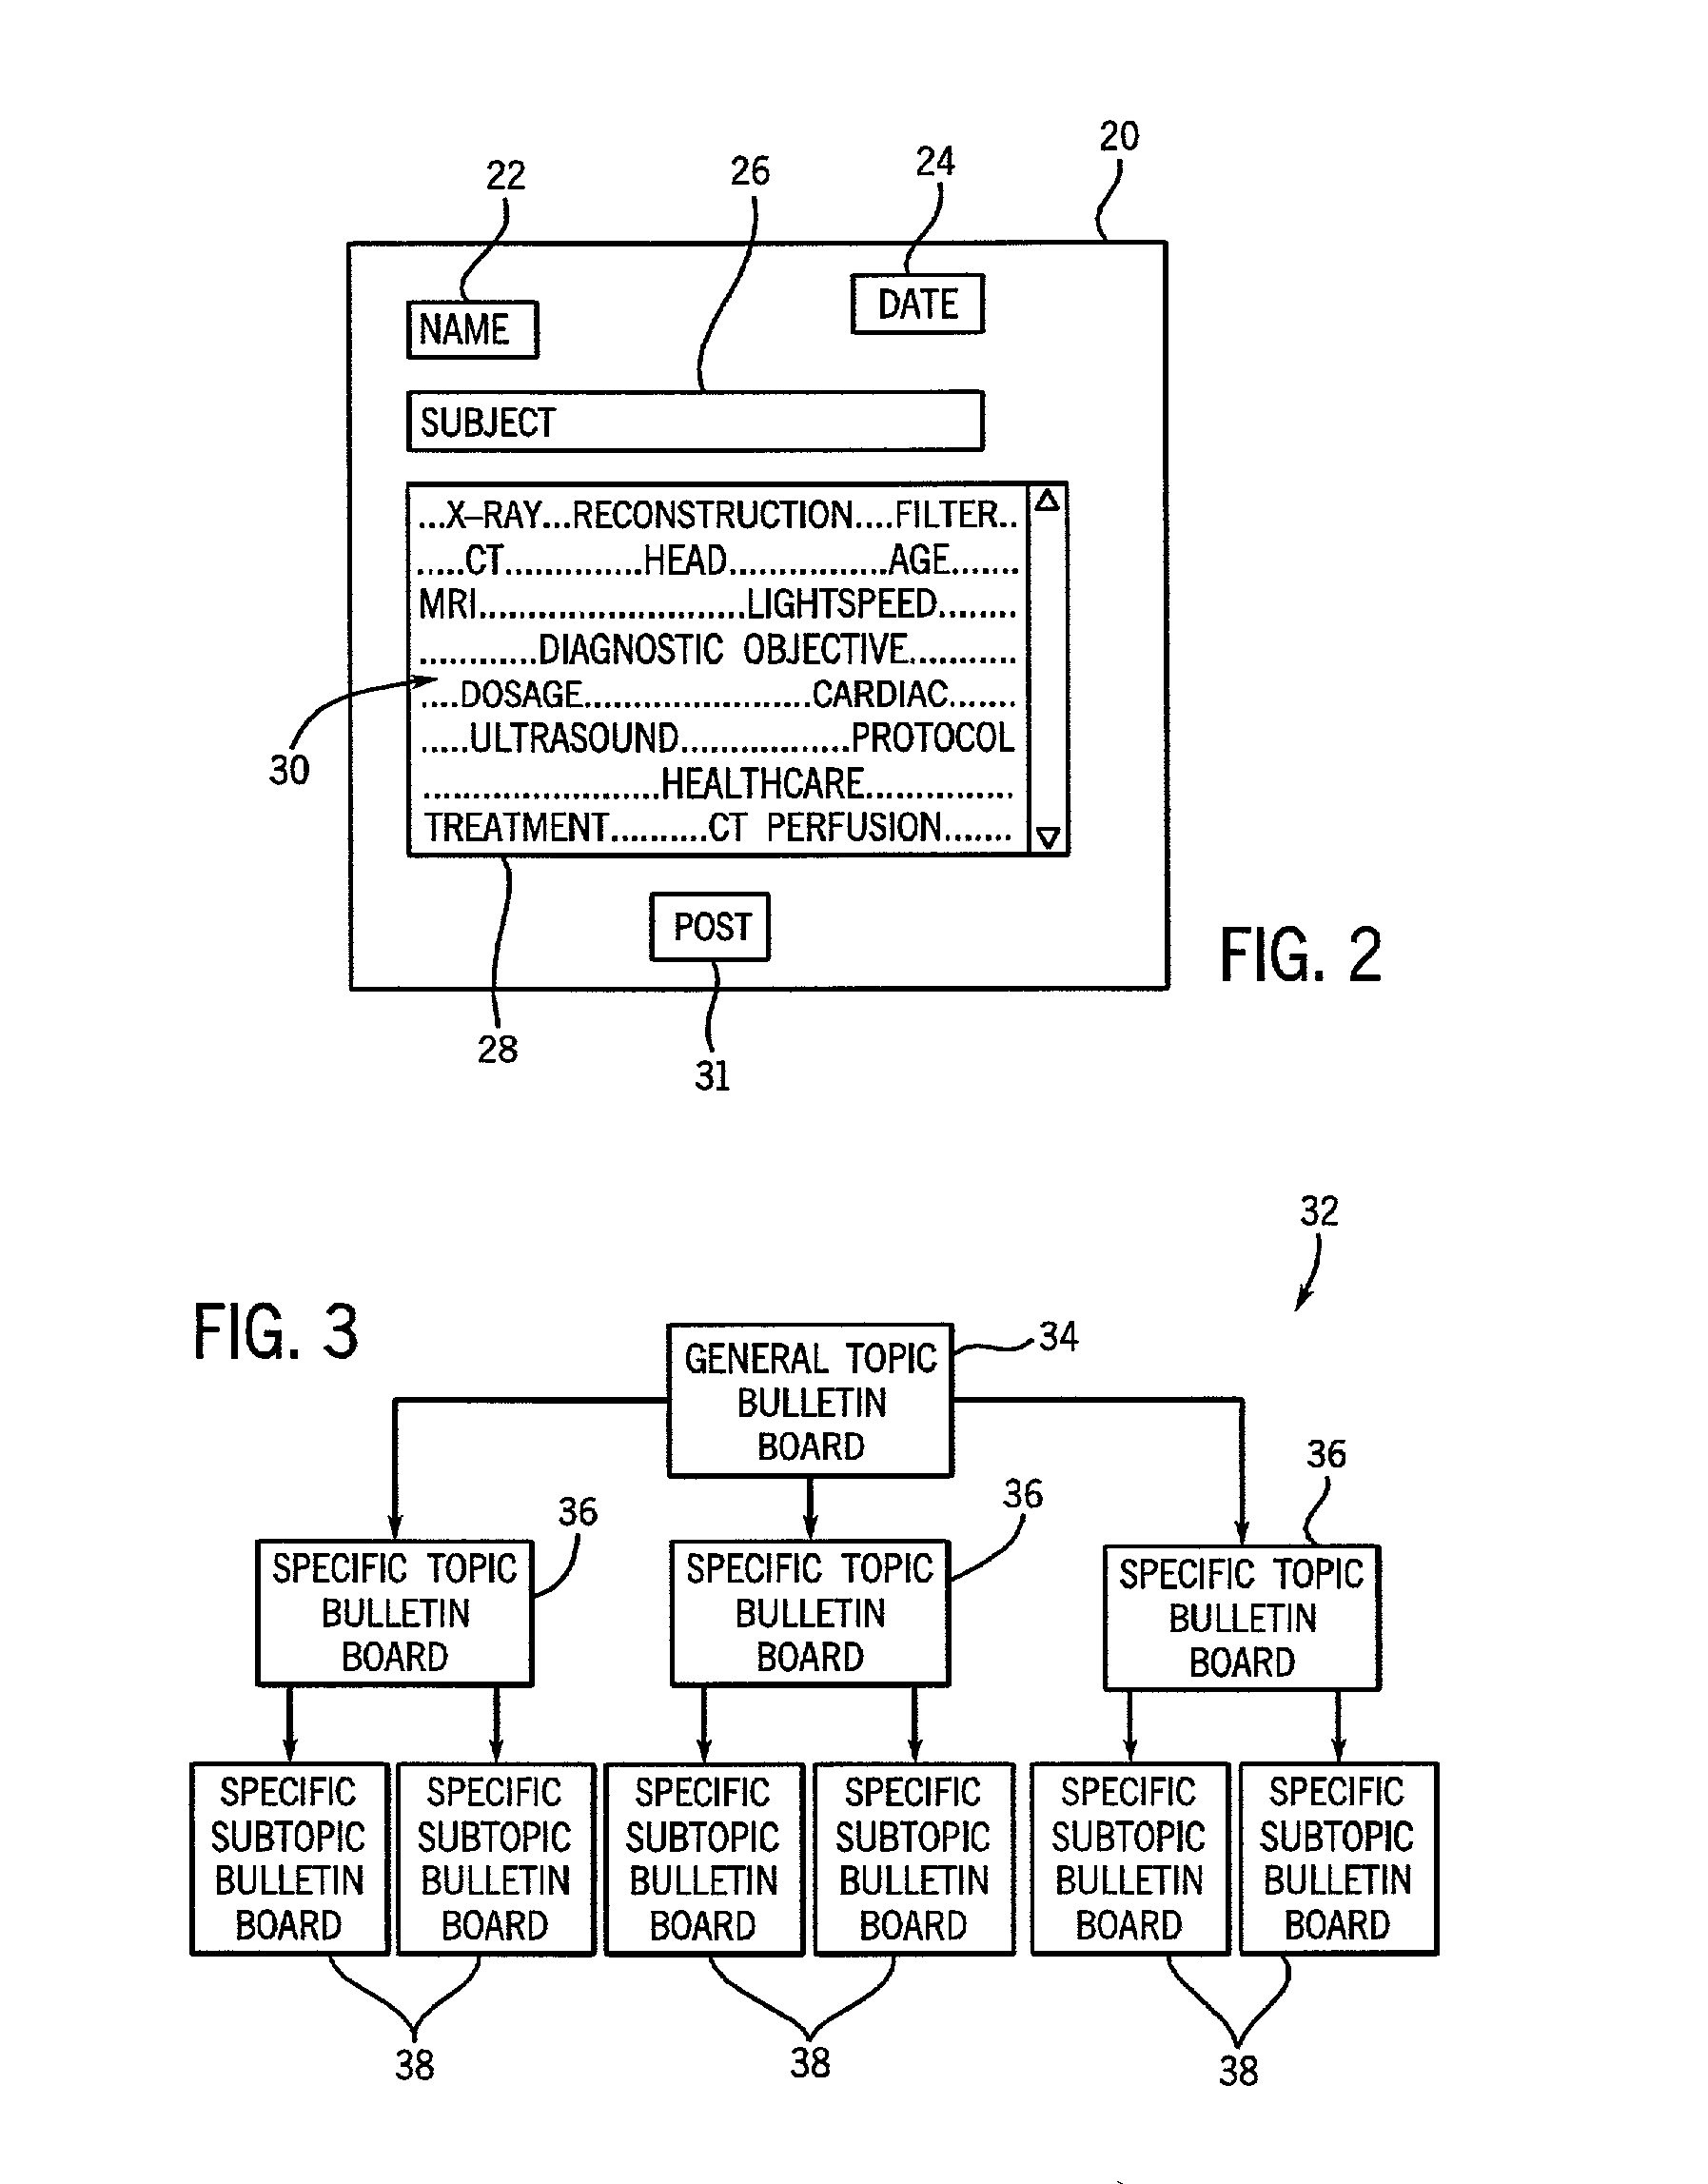 Method and apparatus of cross-pollinating a post to computerized bulletin boards